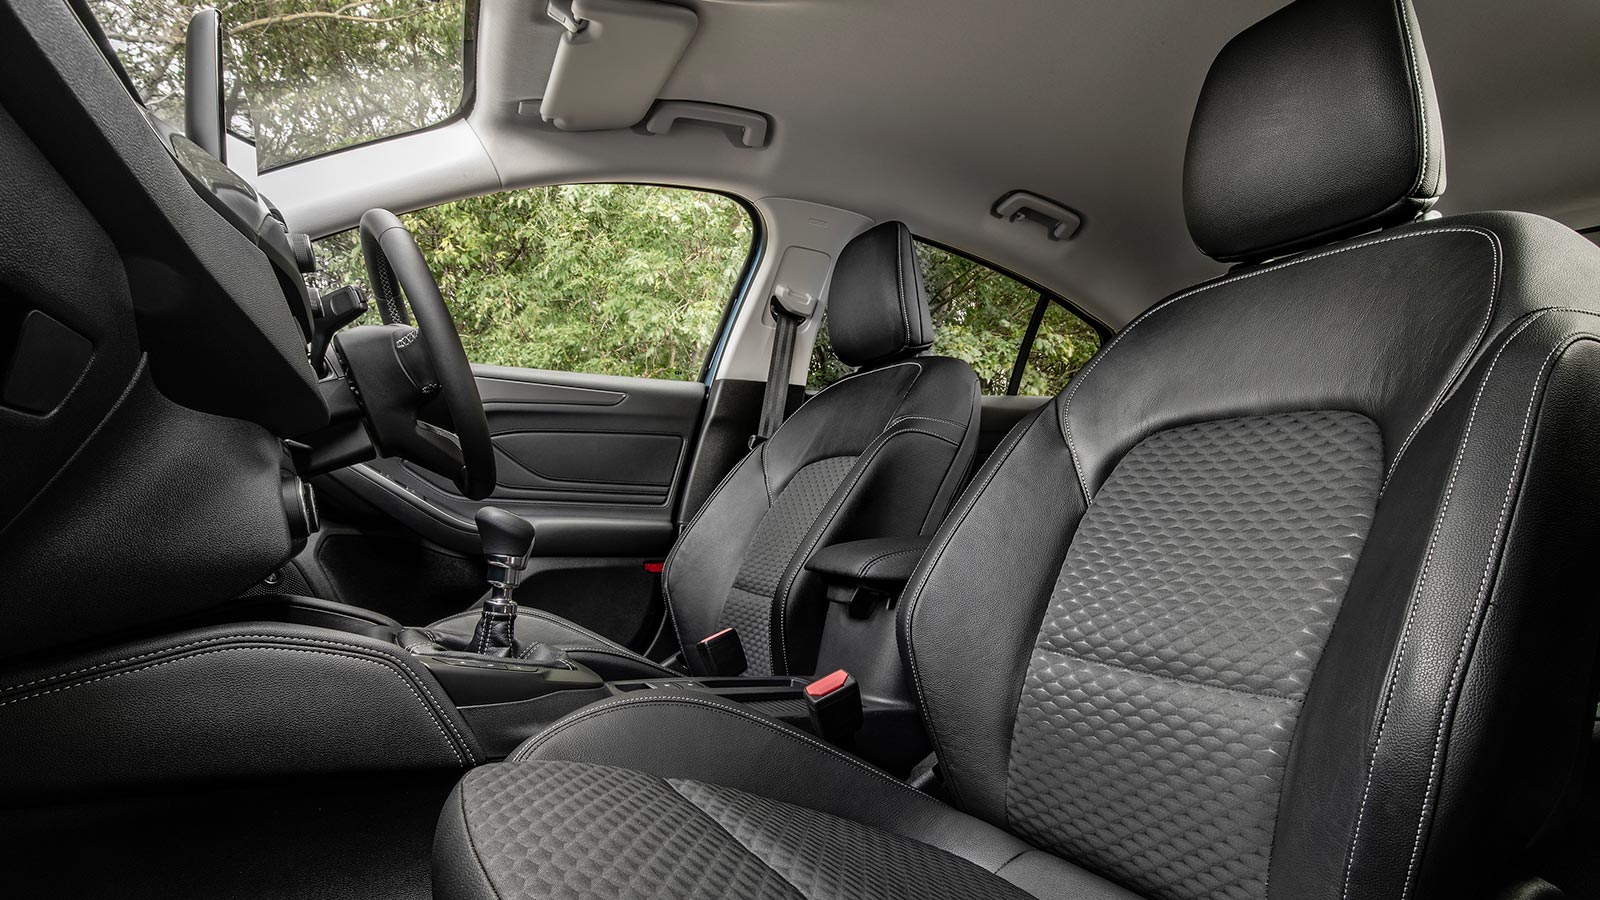 Ford Focus review front seats